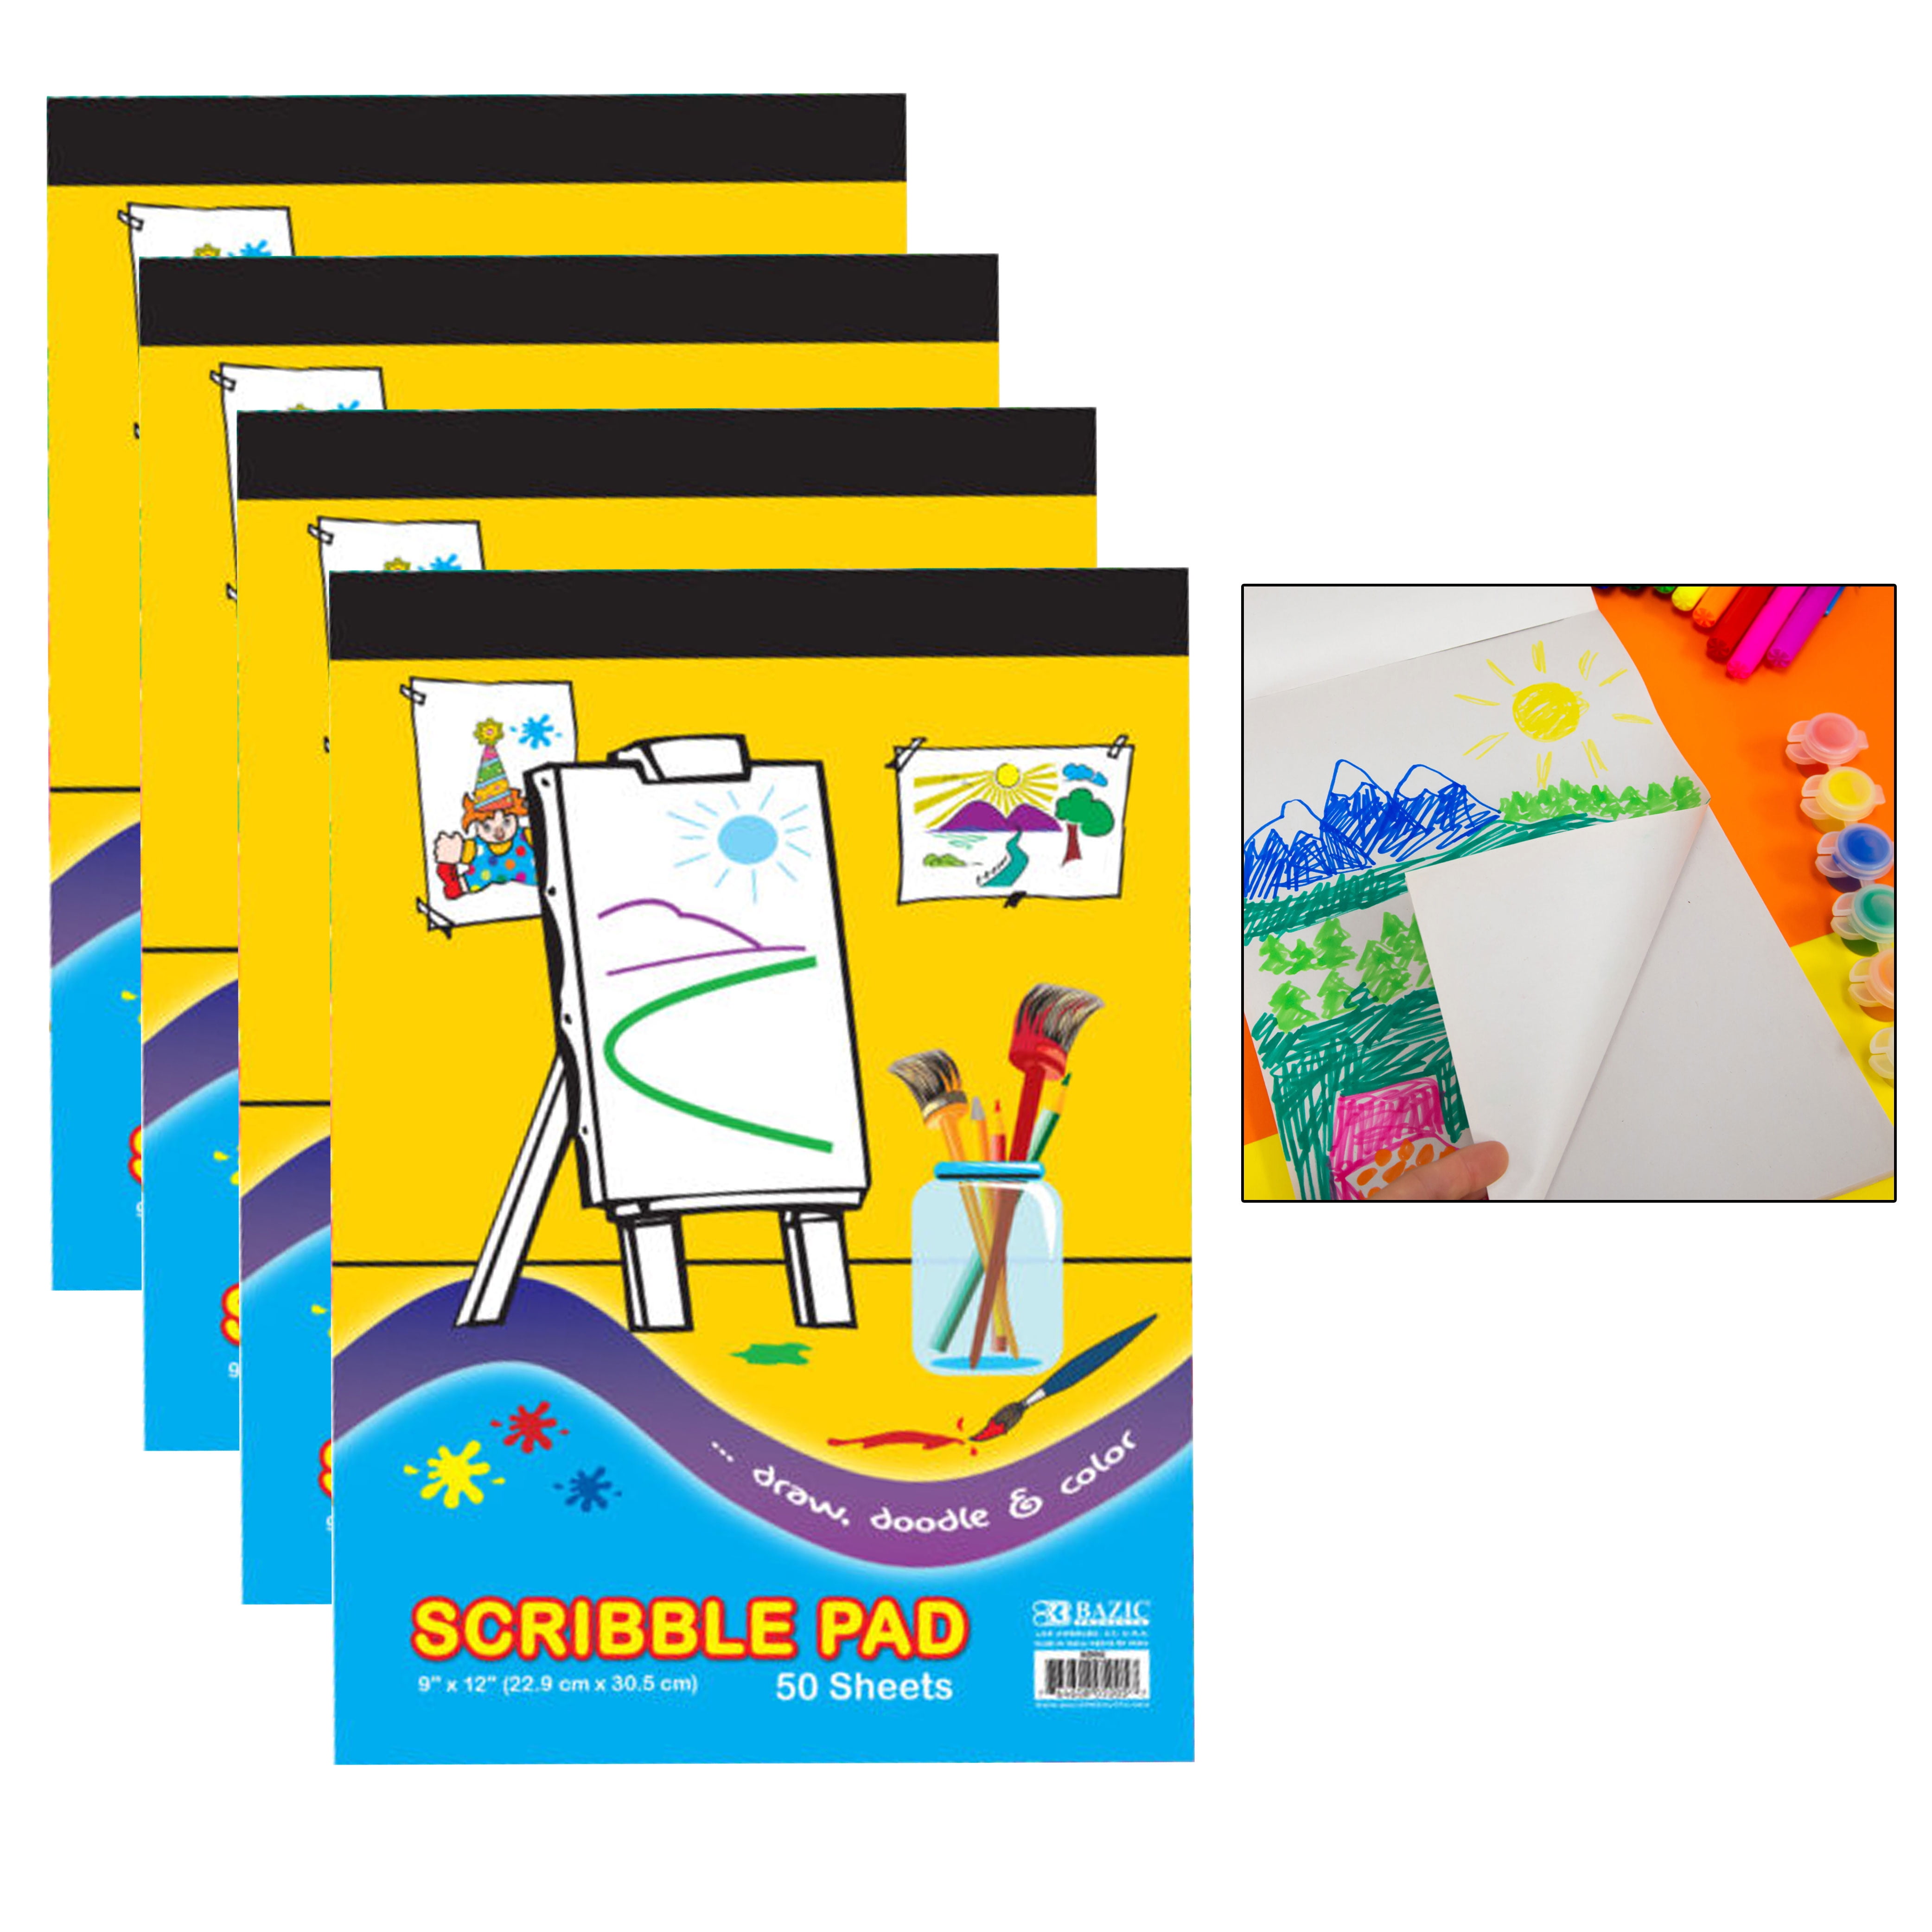 smartich Color Changing Sketch Pad For Kids Sketch Pad Price in India - Buy  smartich Color Changing Sketch Pad For Kids Sketch Pad online at